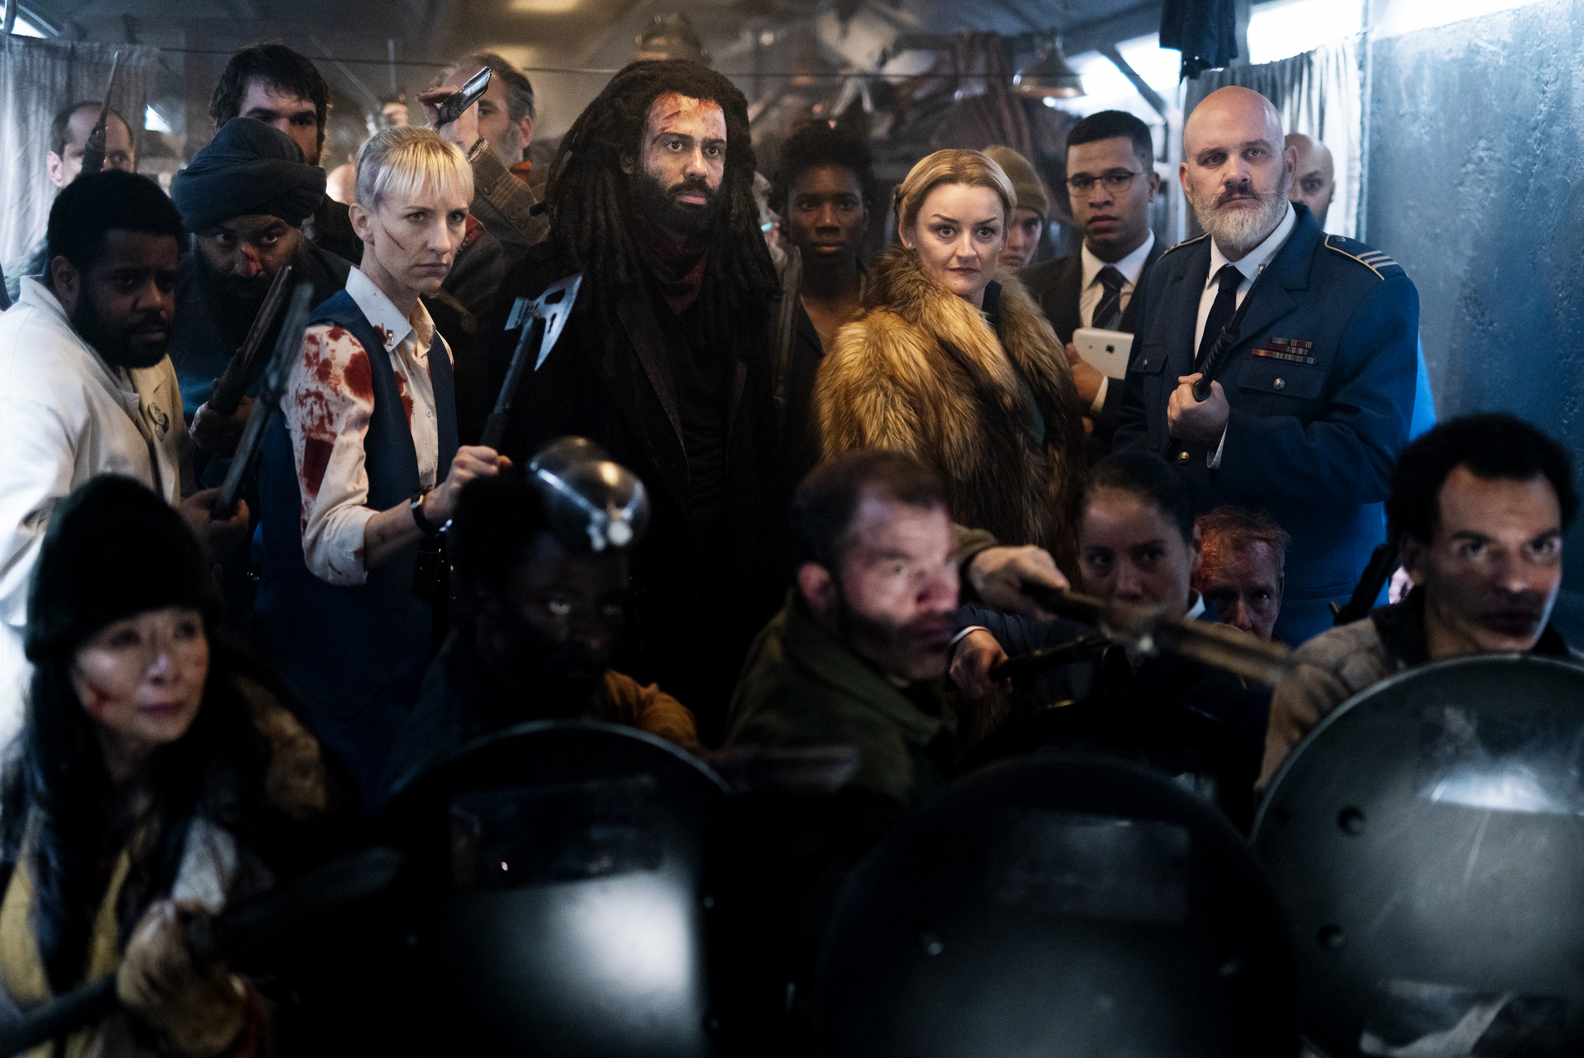 Snowpiercer: The Time of Two Engines | Season 2 | Episode 1